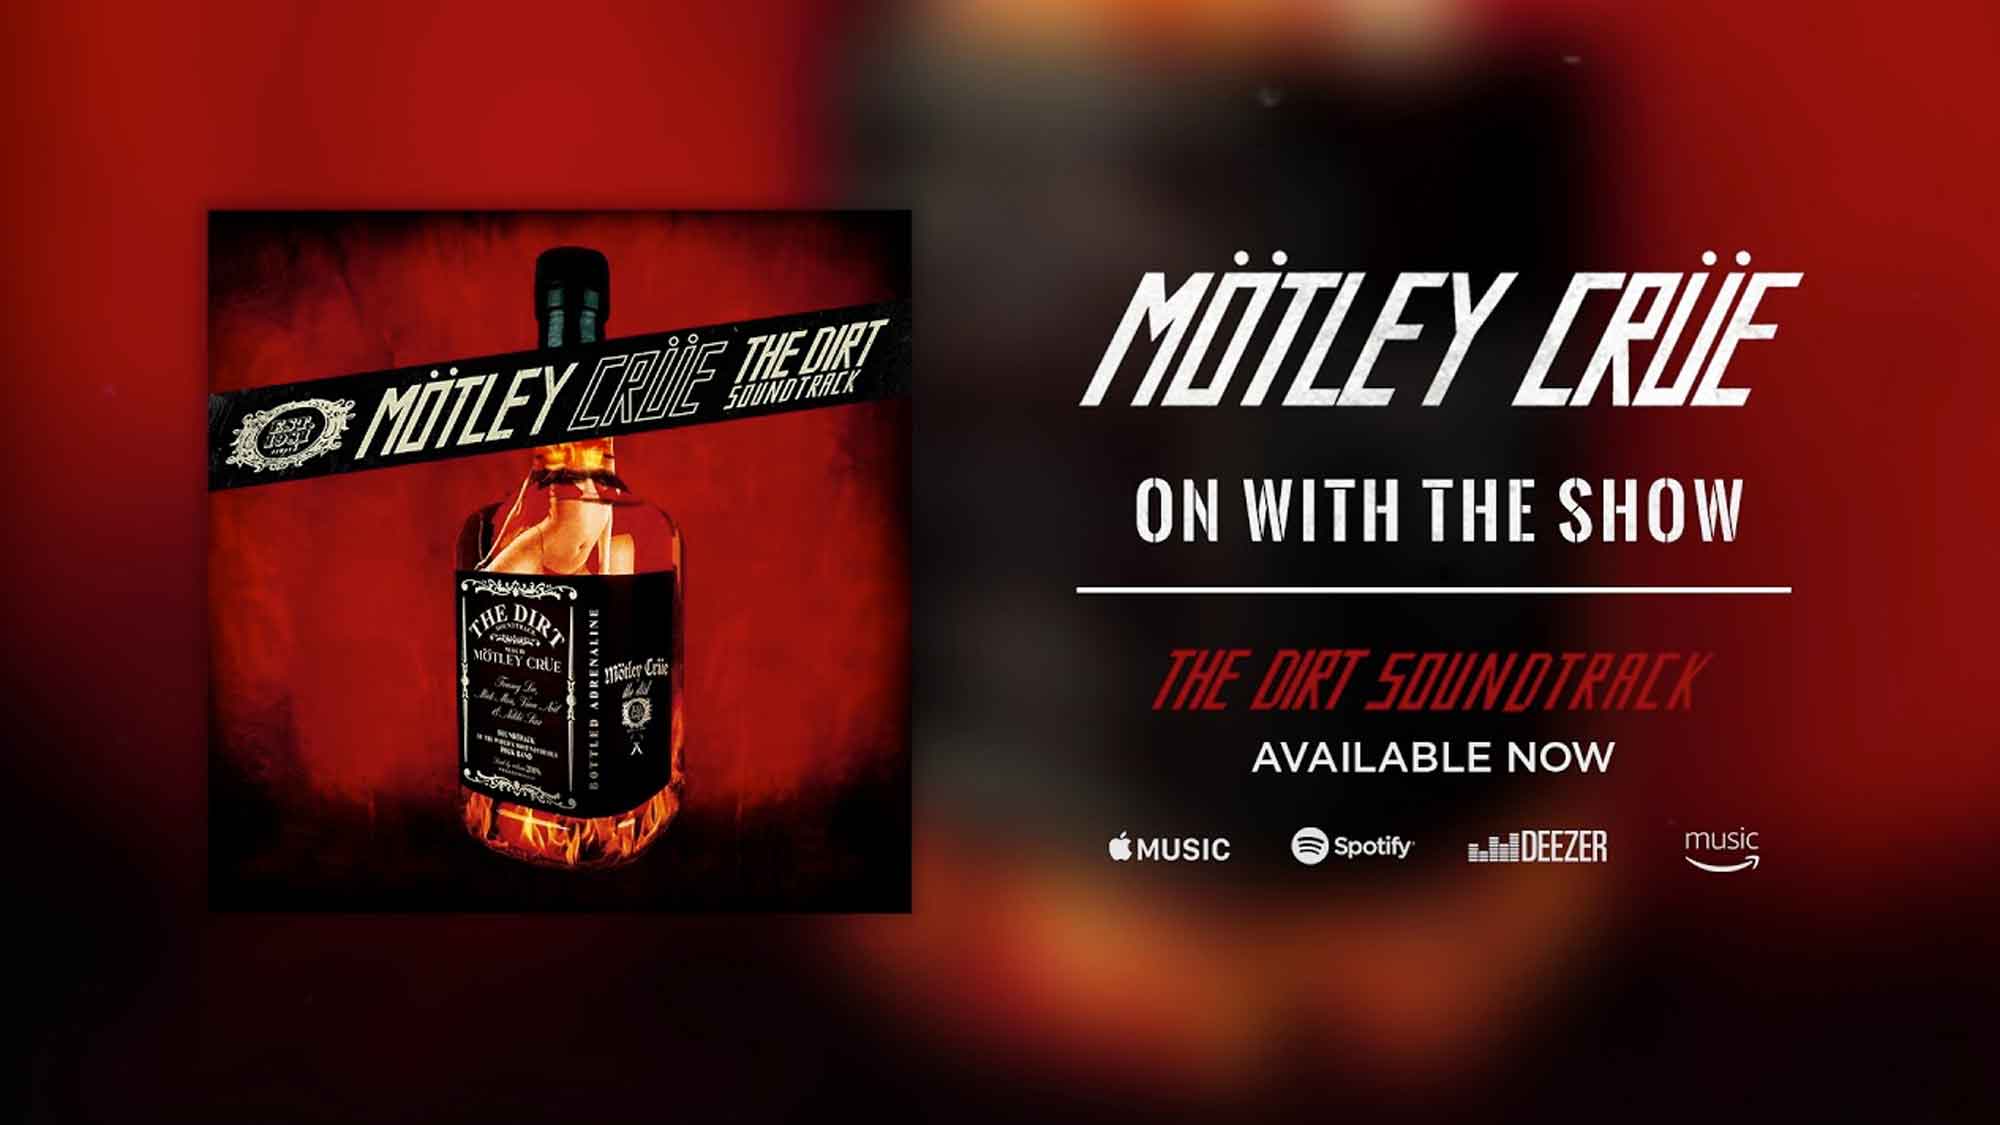 The 30 Best Motley Crue Songs - As Voted By Fans, Not Critics - On With The Show 2